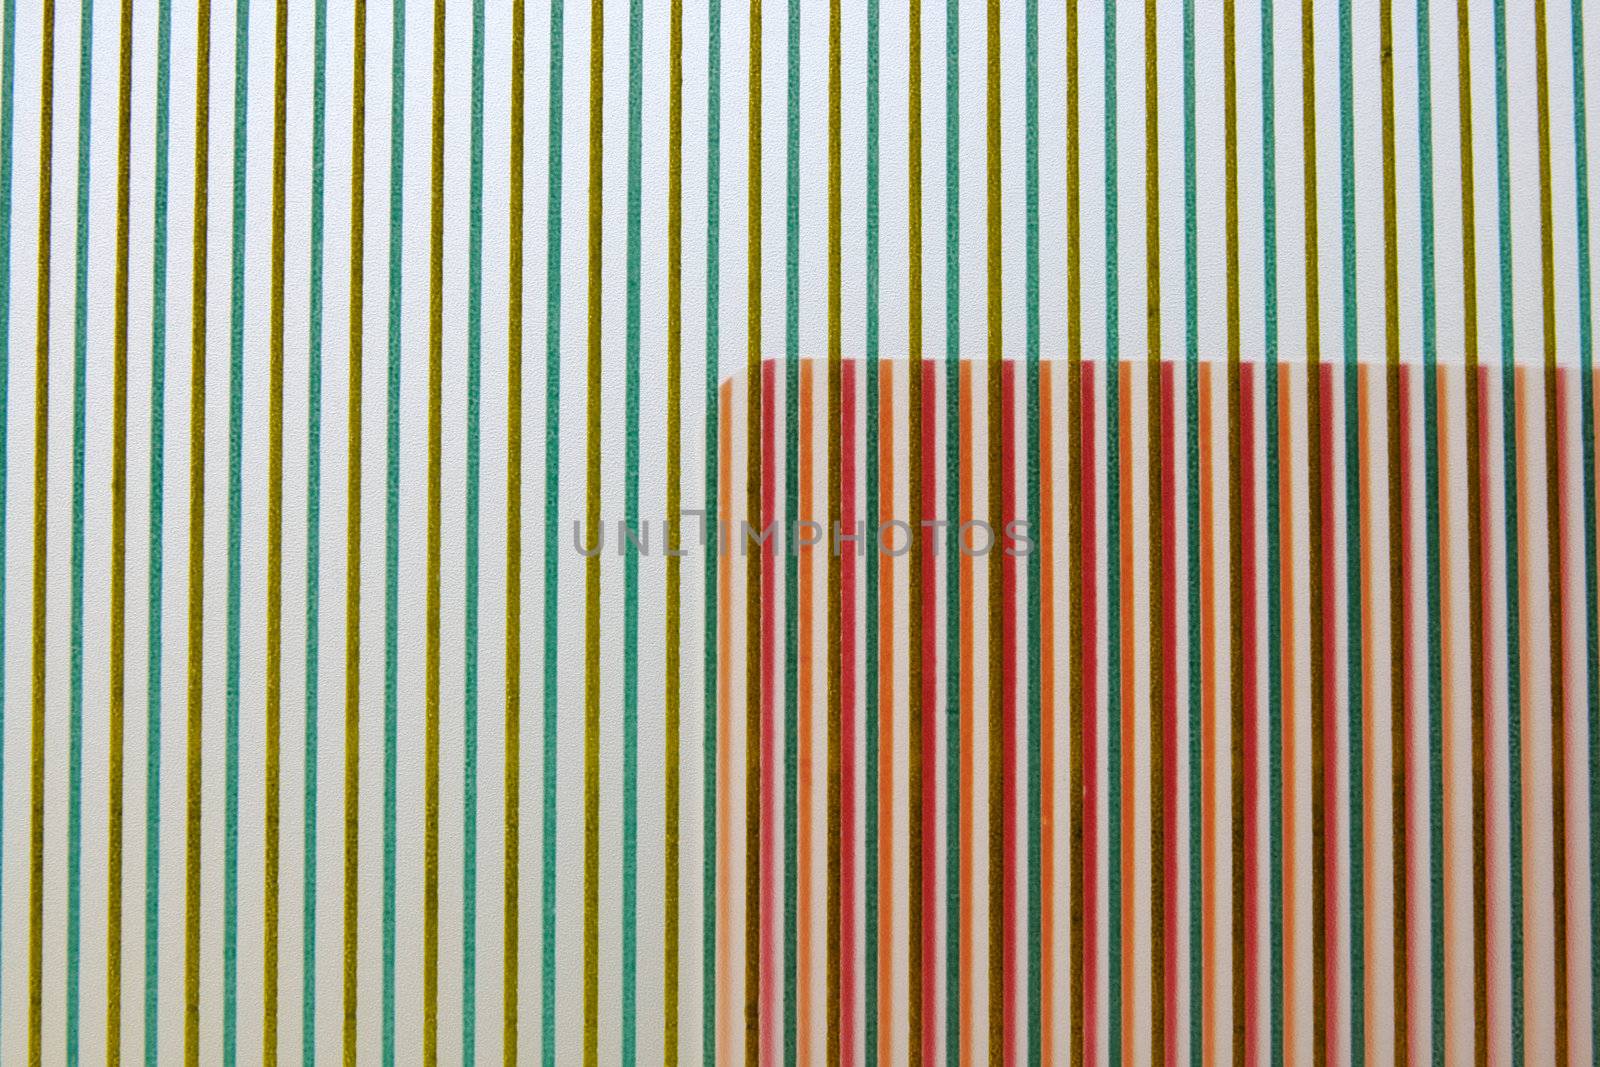 an area of warm stripes overlapping a background of cooler-colored stripes